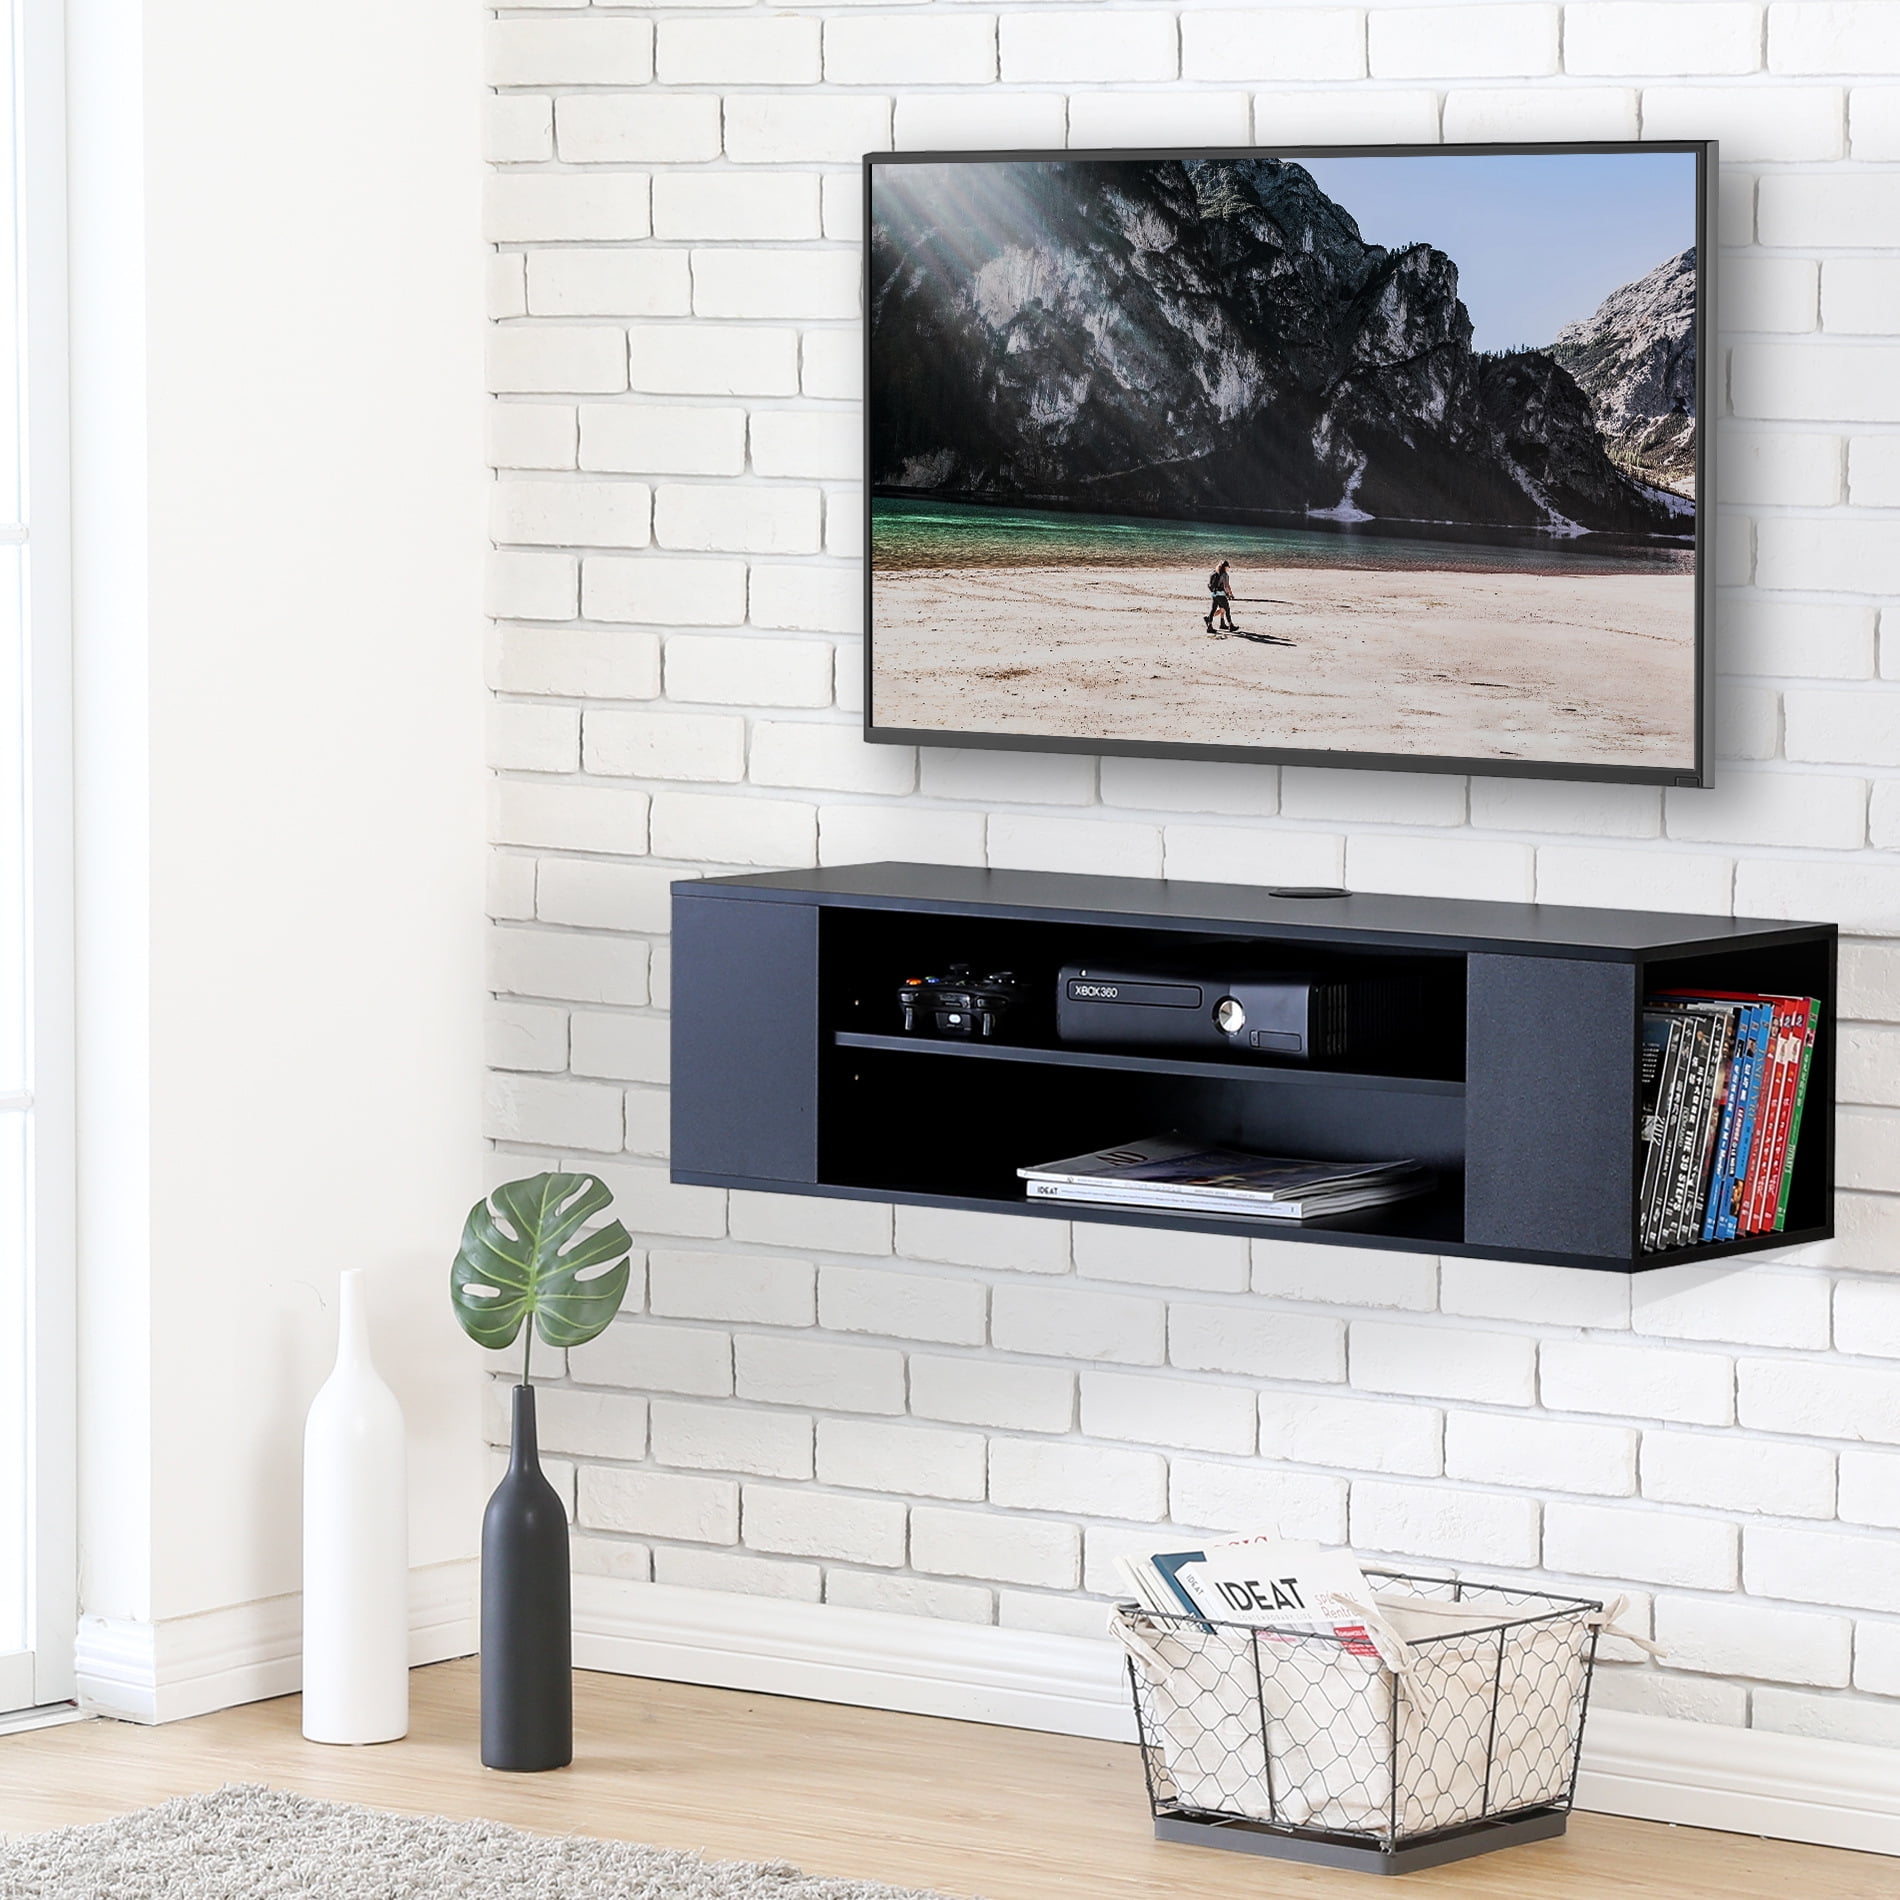 Fitueyes Floating Tv Stands Wall Mounted Audiovideo Black Wood Grain